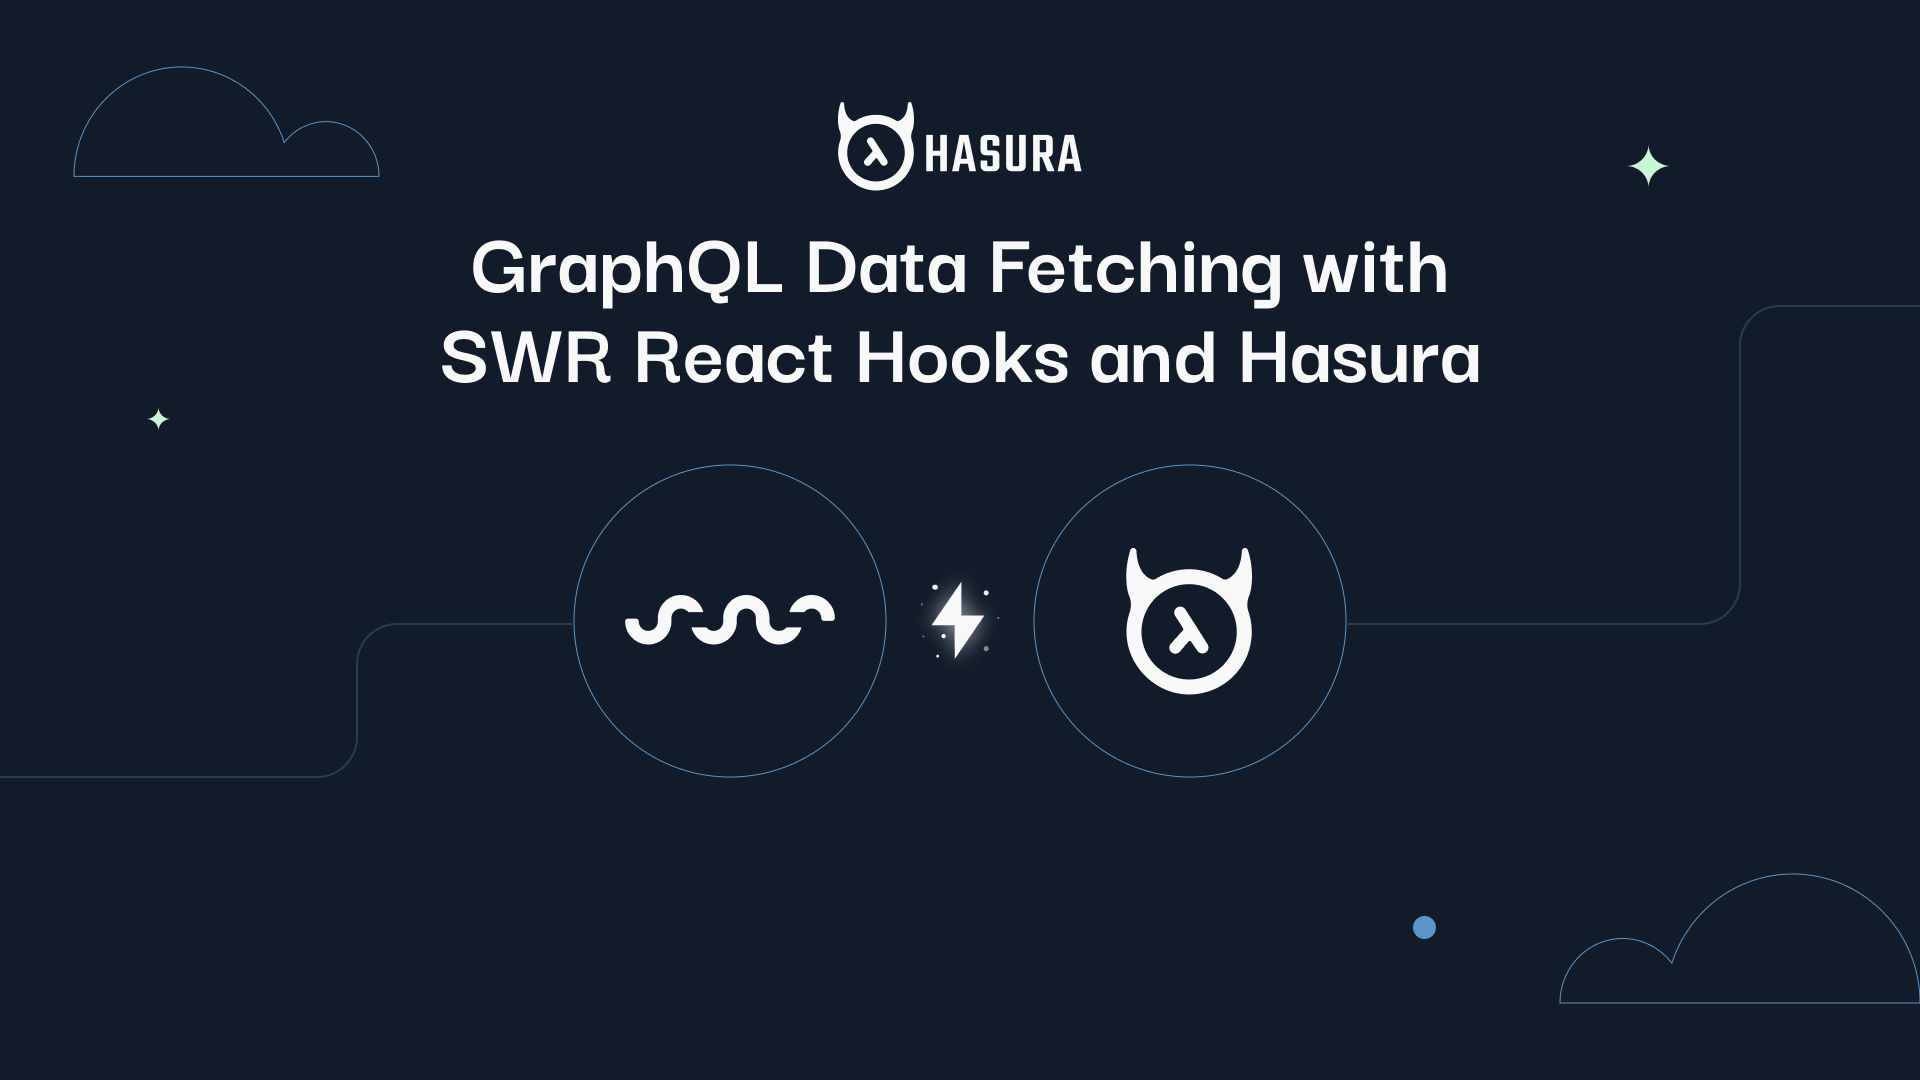 GraphQL Data Fetching with SWR React Hooks and Hasura